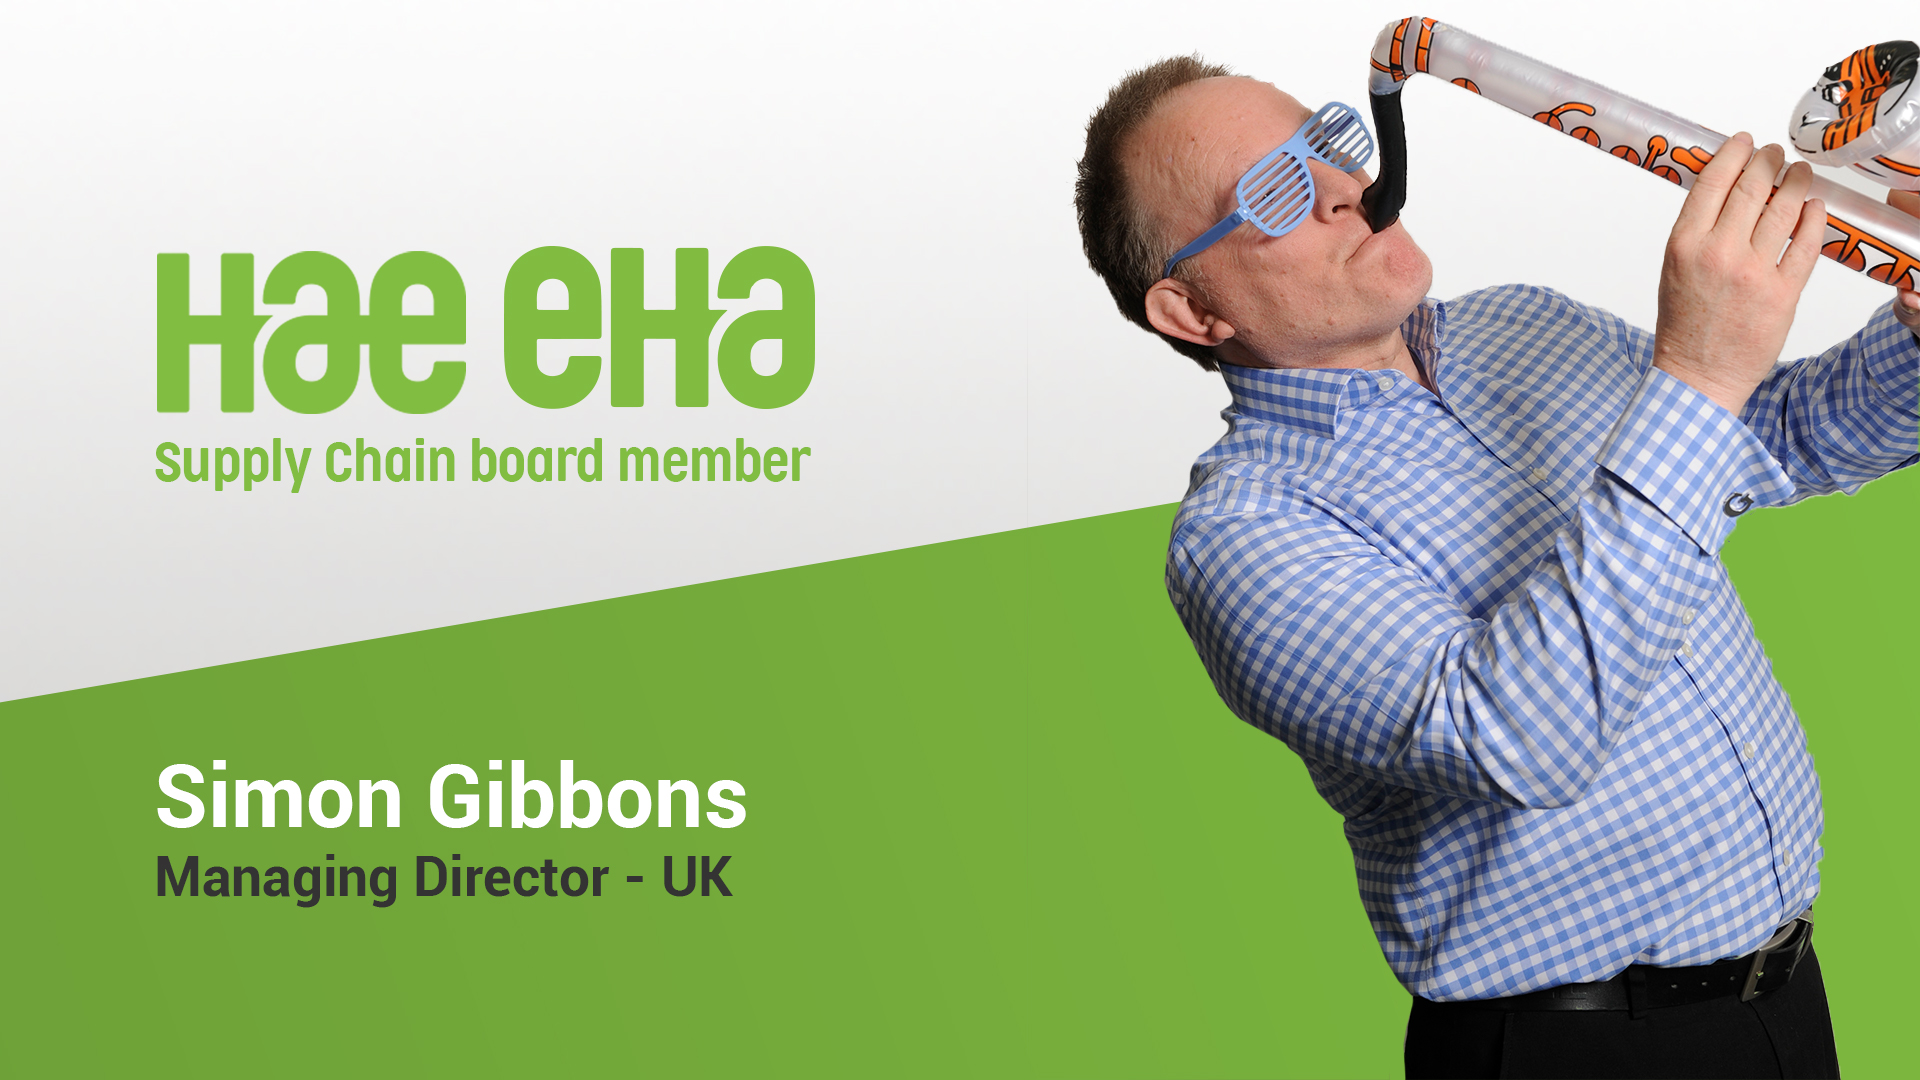 Simon Gibbons celebrates his election to the HAE EHA supply chain board by playing an inflatable saxophone.